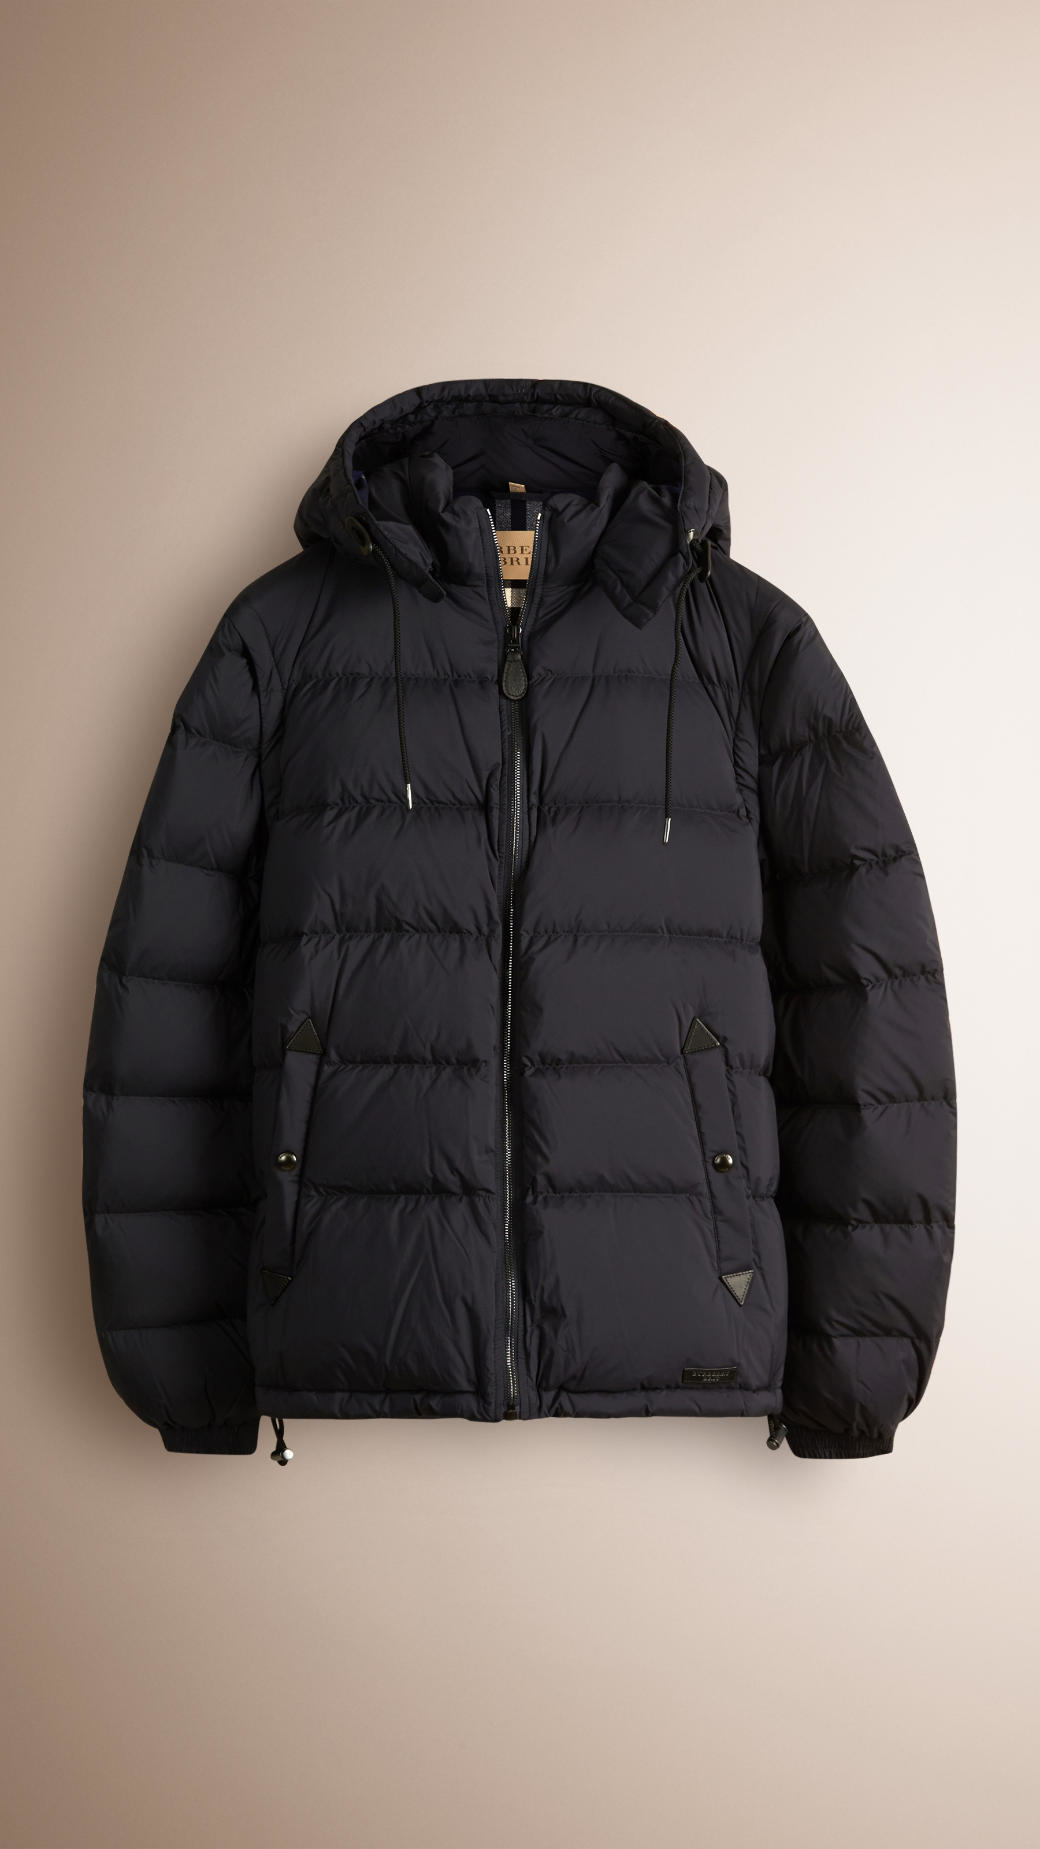 Burberry Goose Puffer Jacket With Removable Sleeves Navy in Blue for Men - Lyst